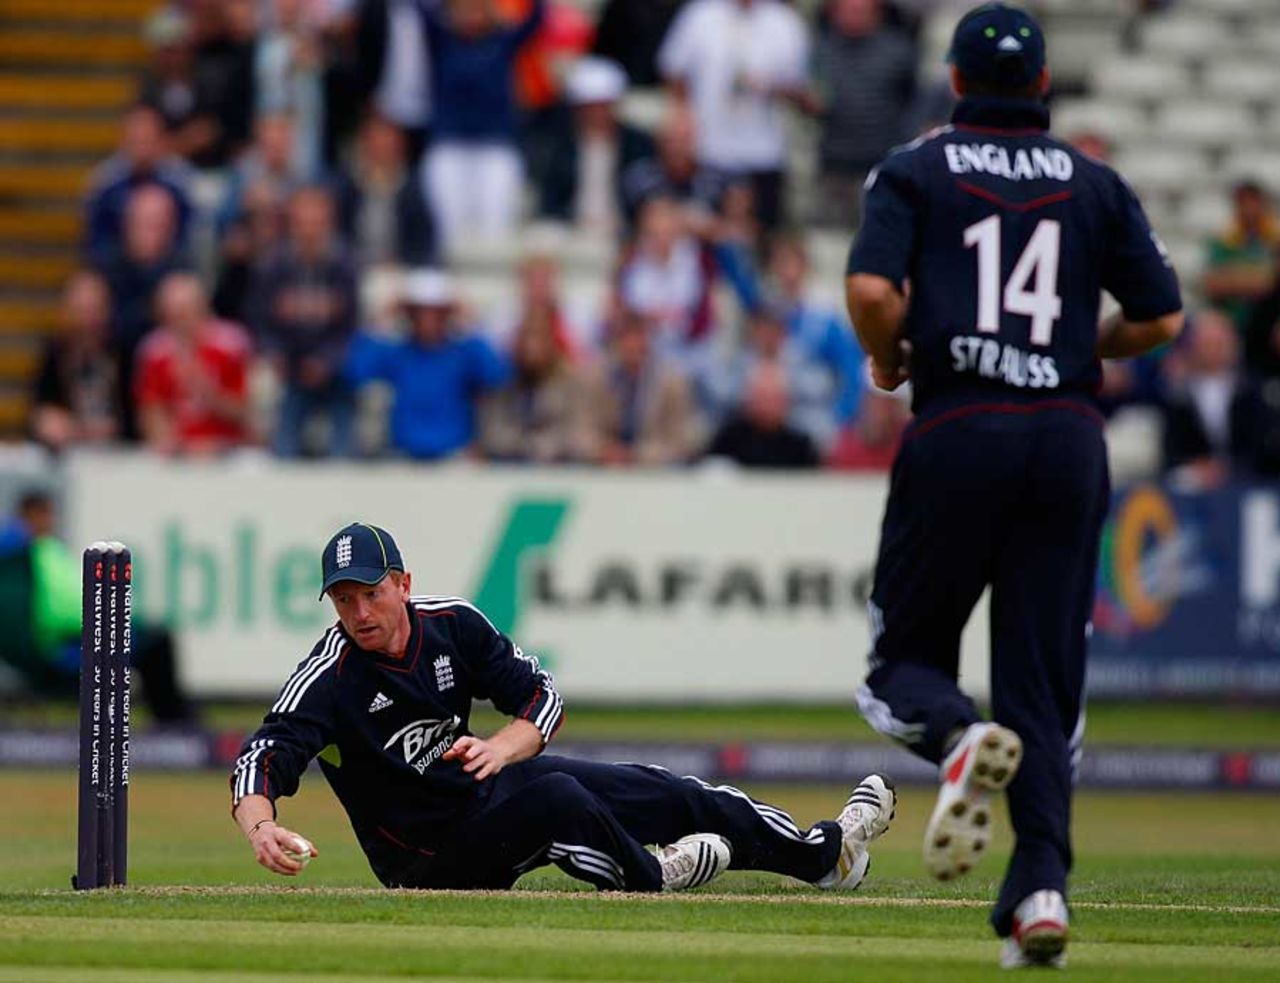 Paul Collingwood completes a run-out while sprawled on the ground, England v Bangladesh, 3rd ODI, Edgbaston, July 12, 2010